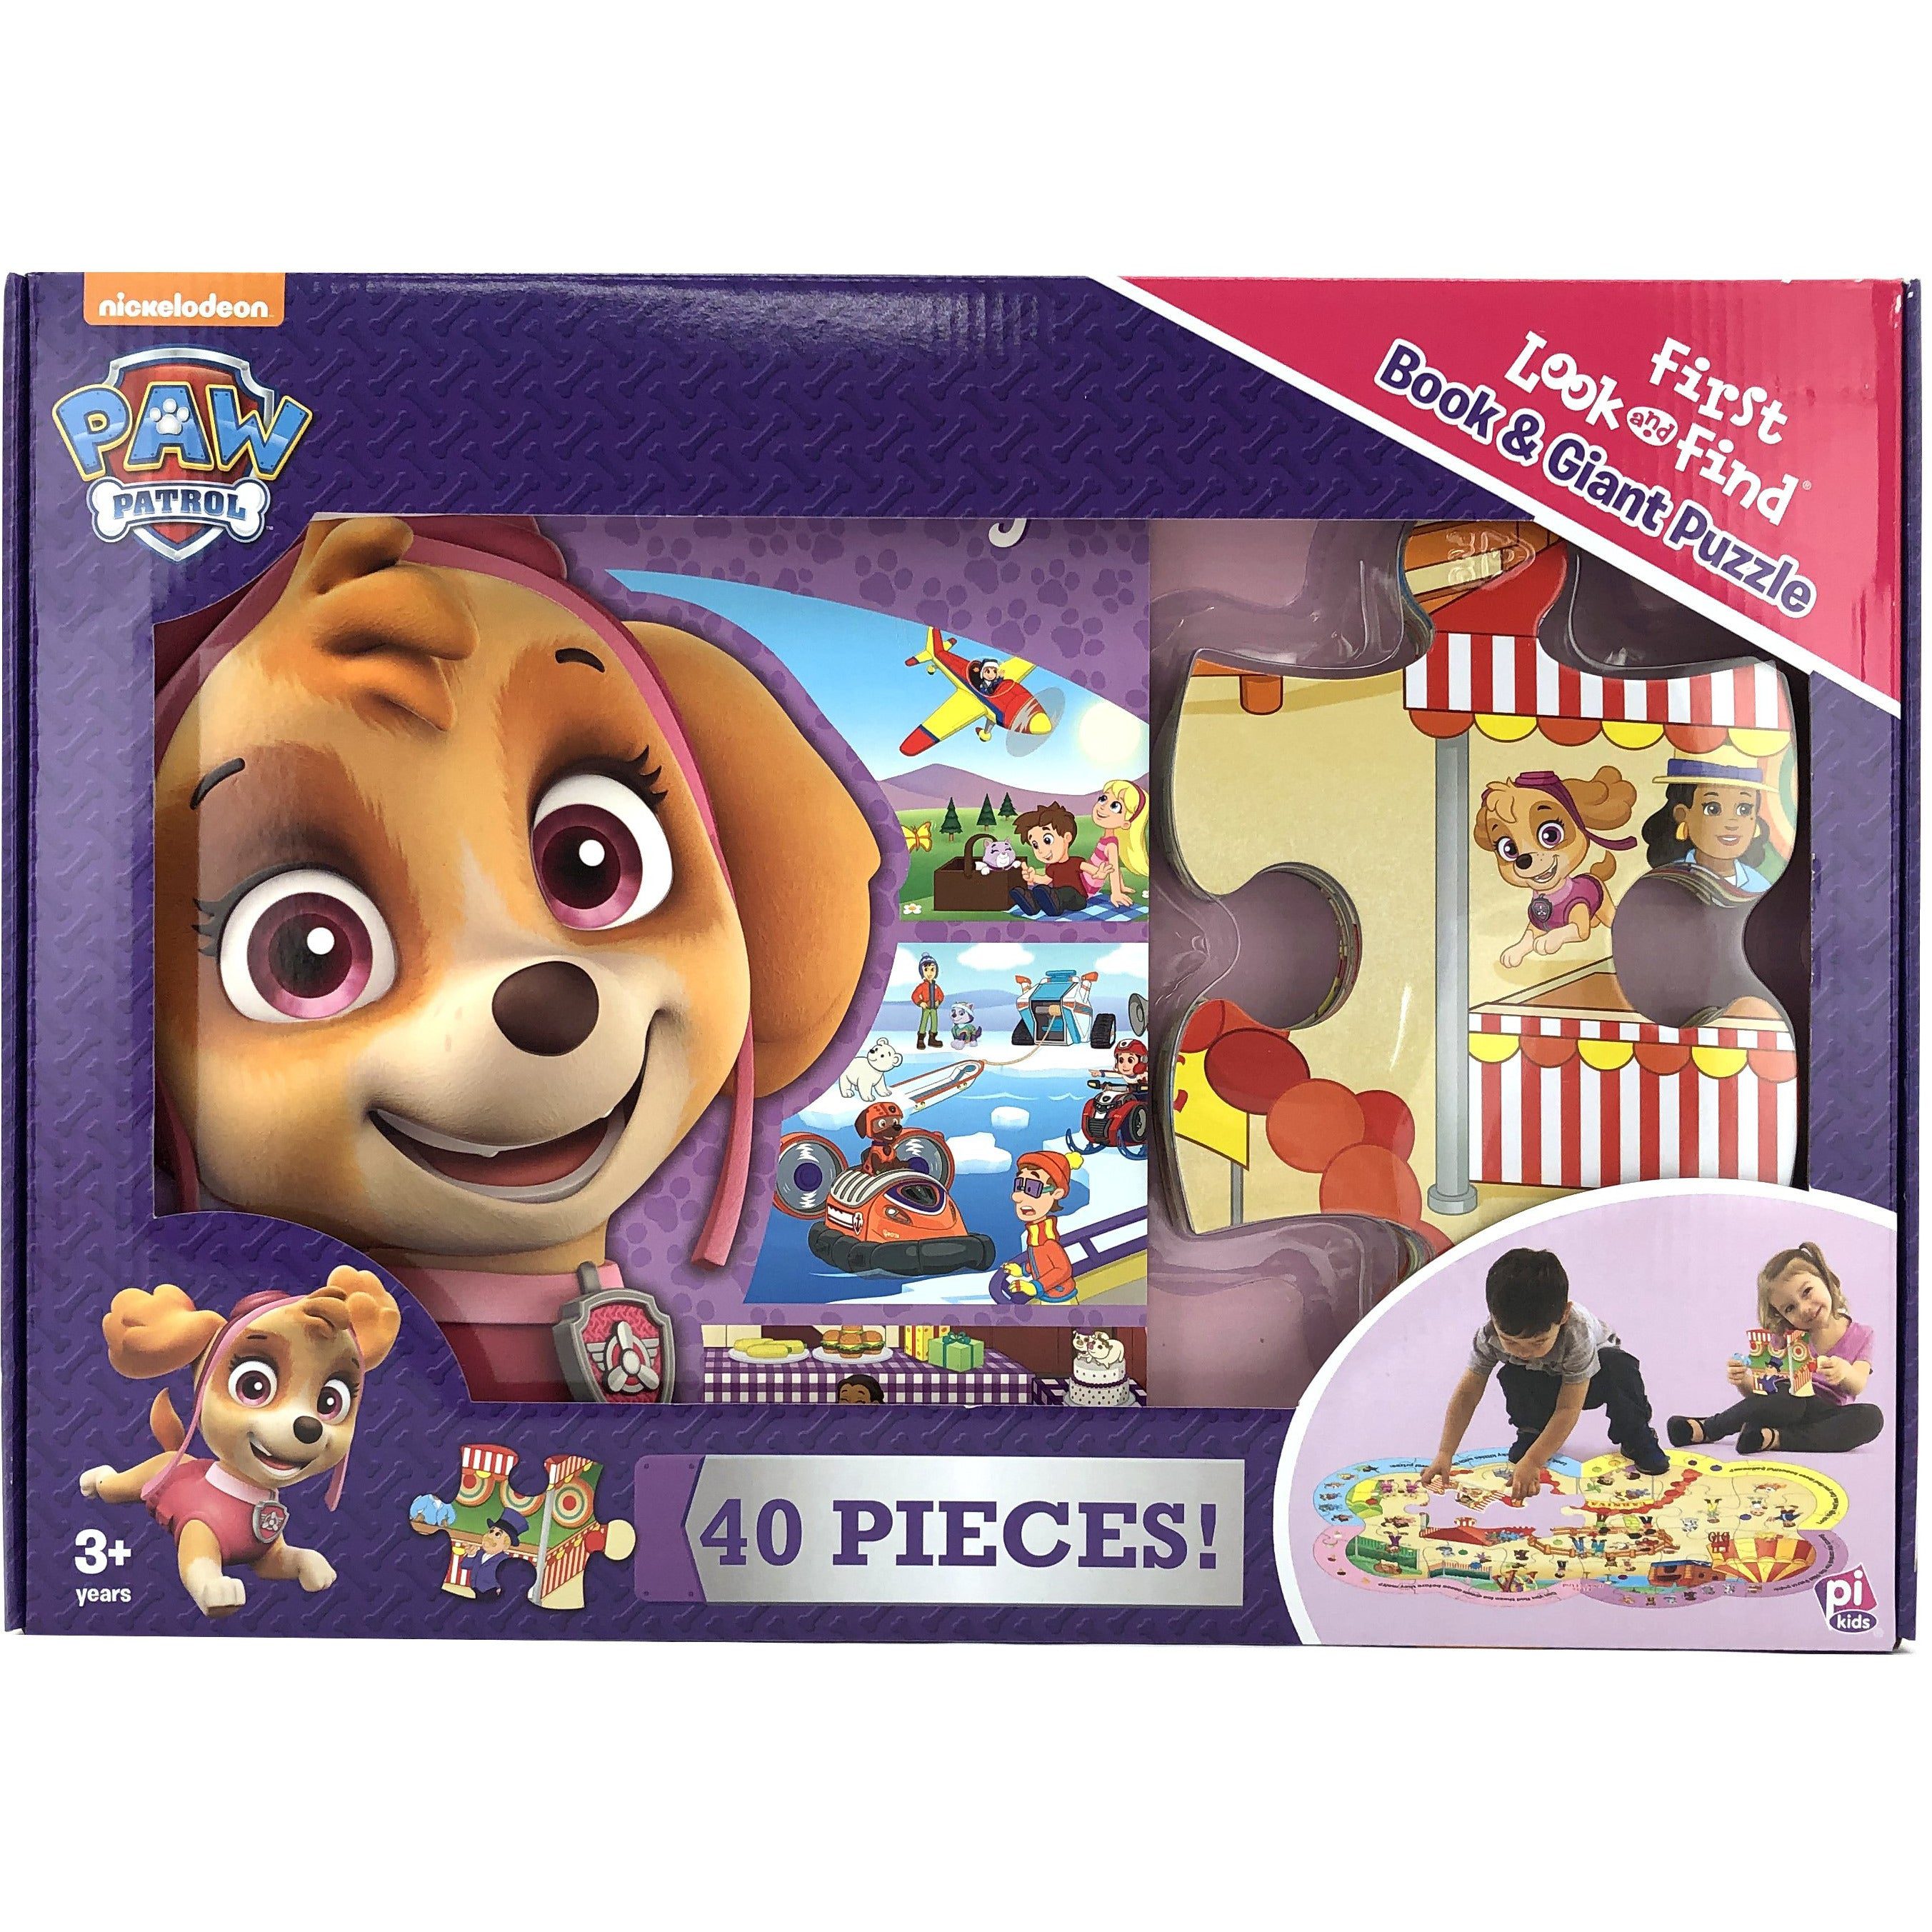 Paw Patrol Board Book and Puzzle with Skye